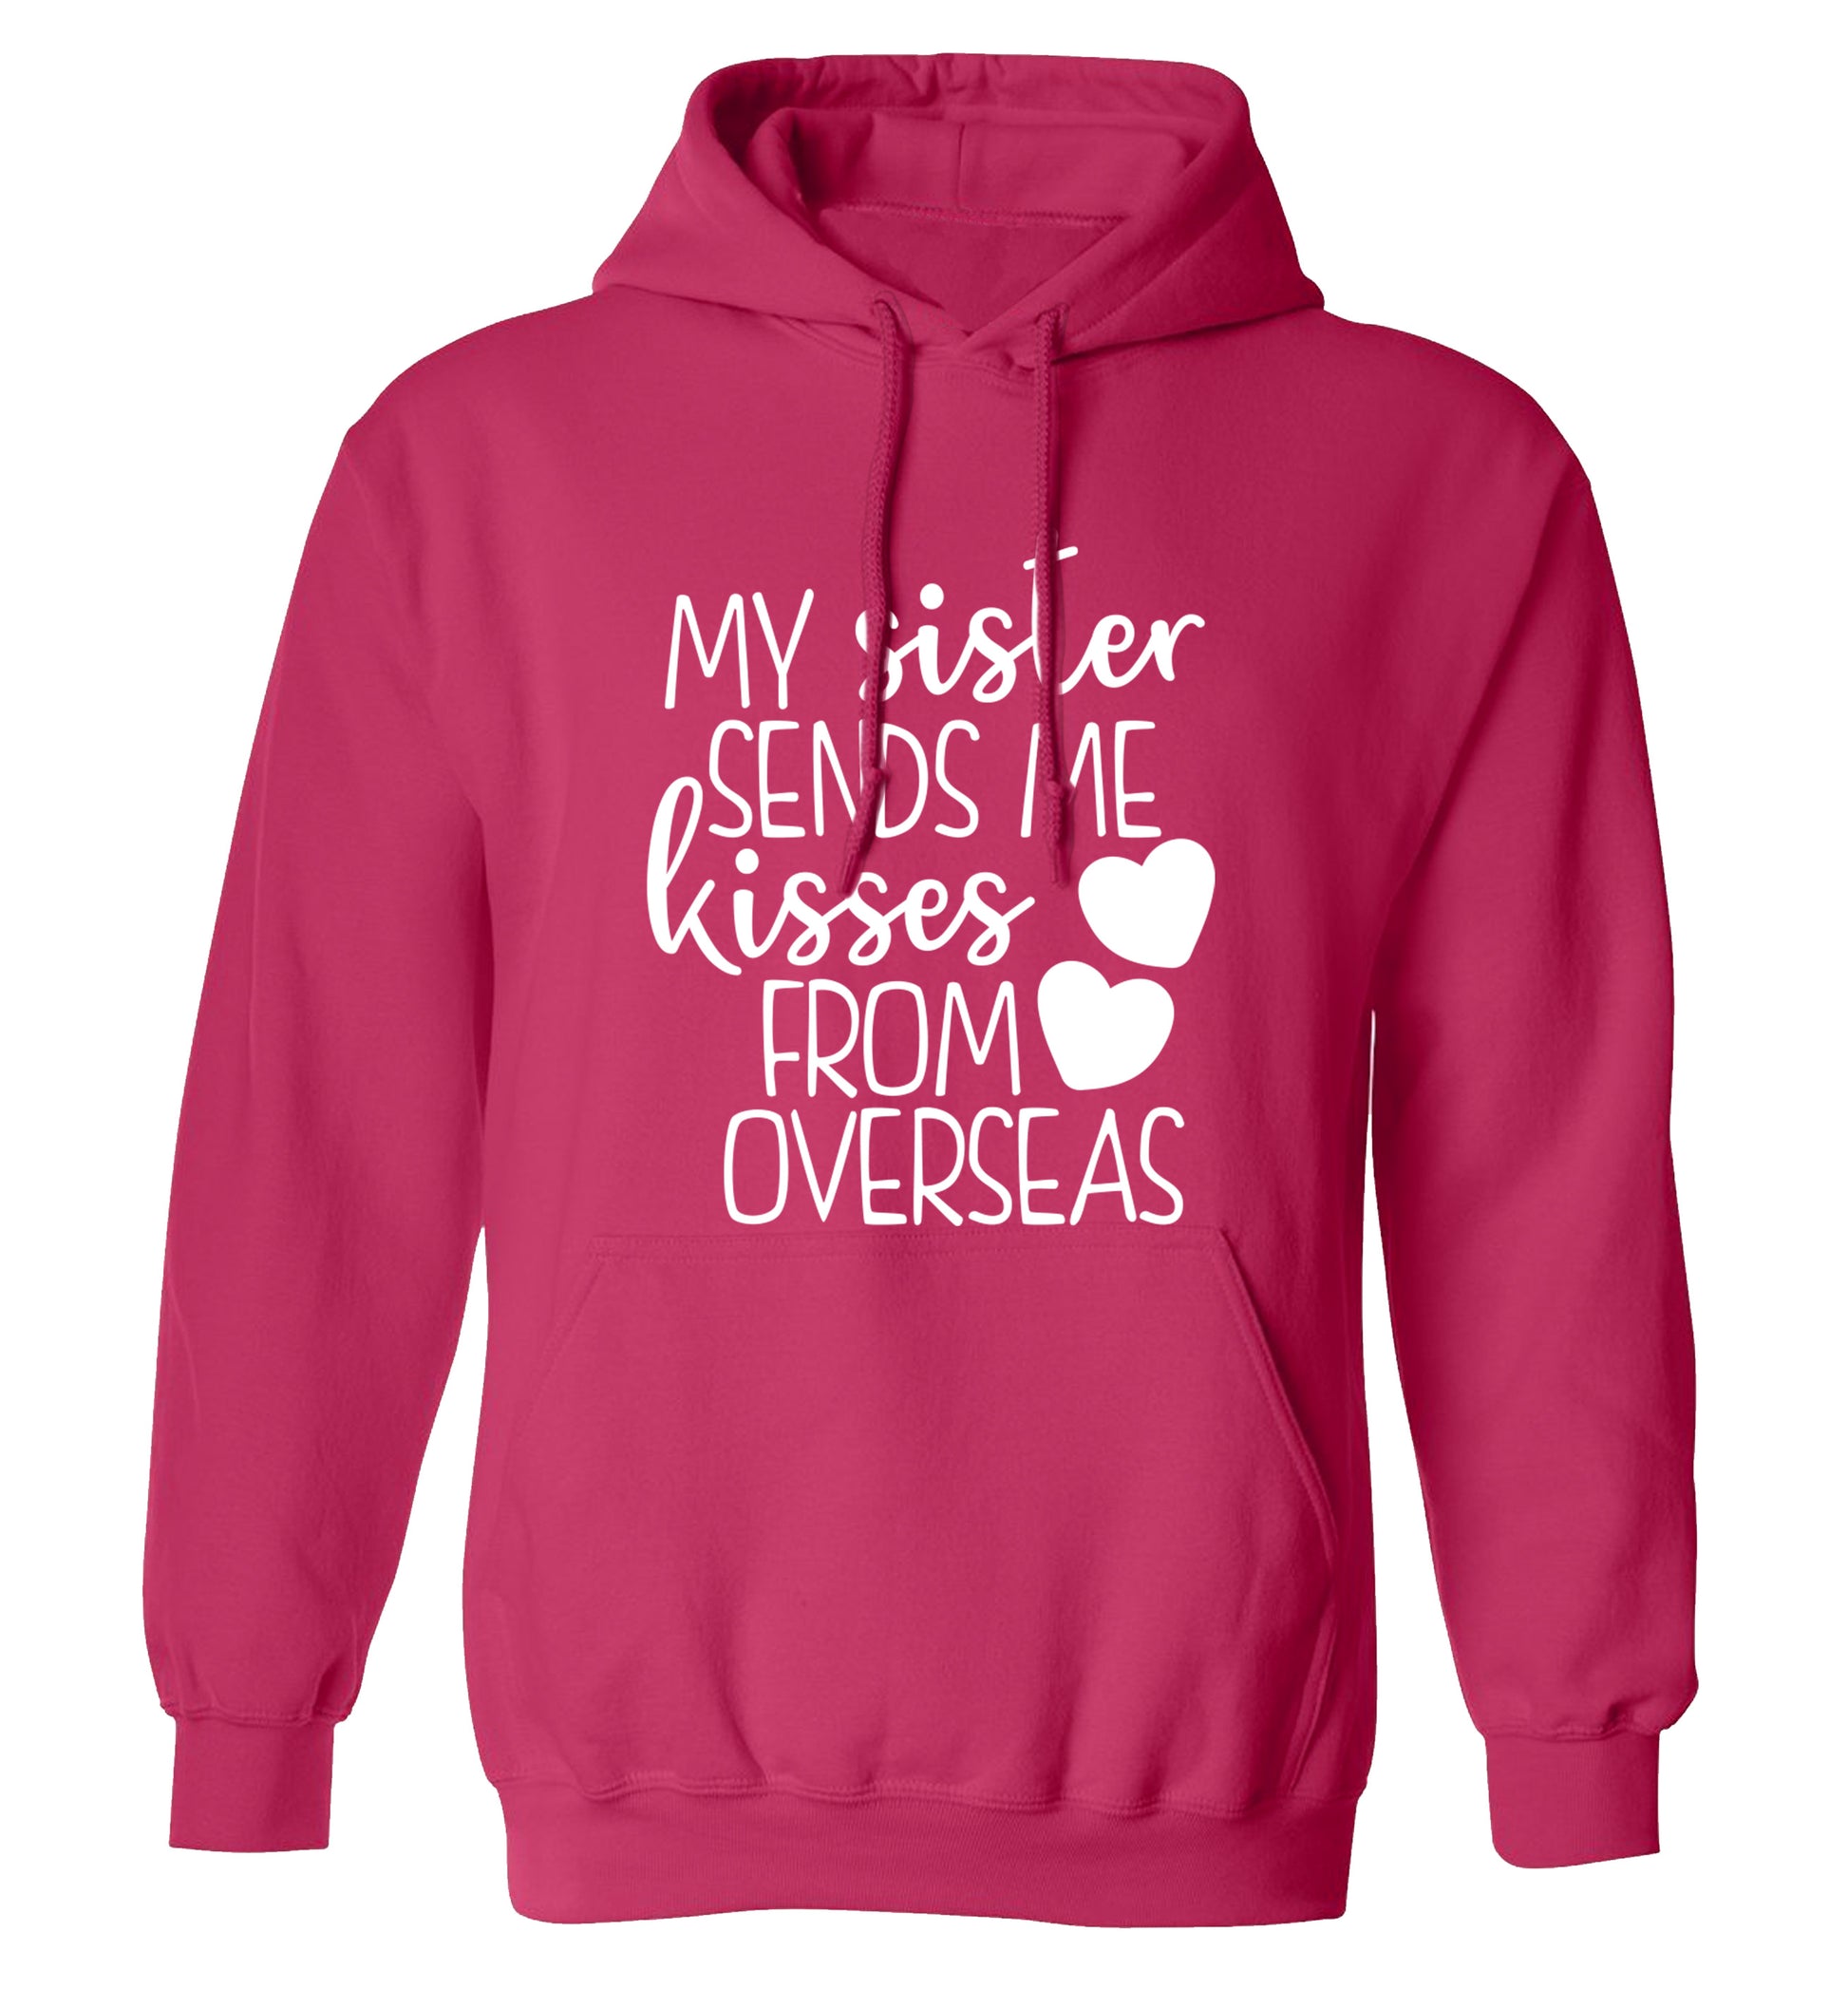 My sister sends me kisses from overseas adults unisex pink hoodie 2XL